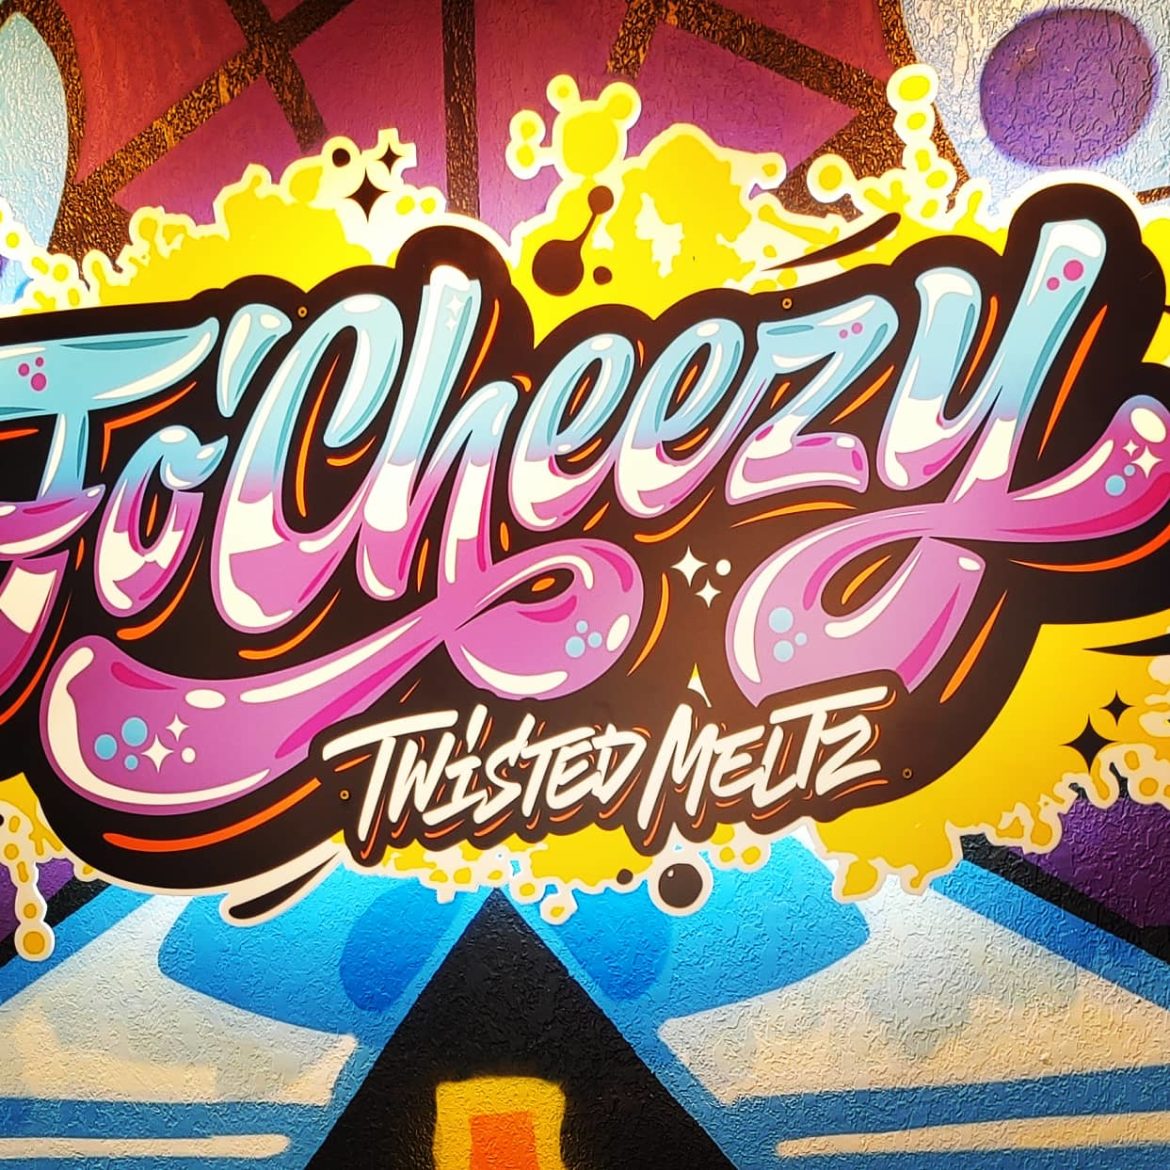 FO’CHEEZY Twisted Meltz  ( Review )